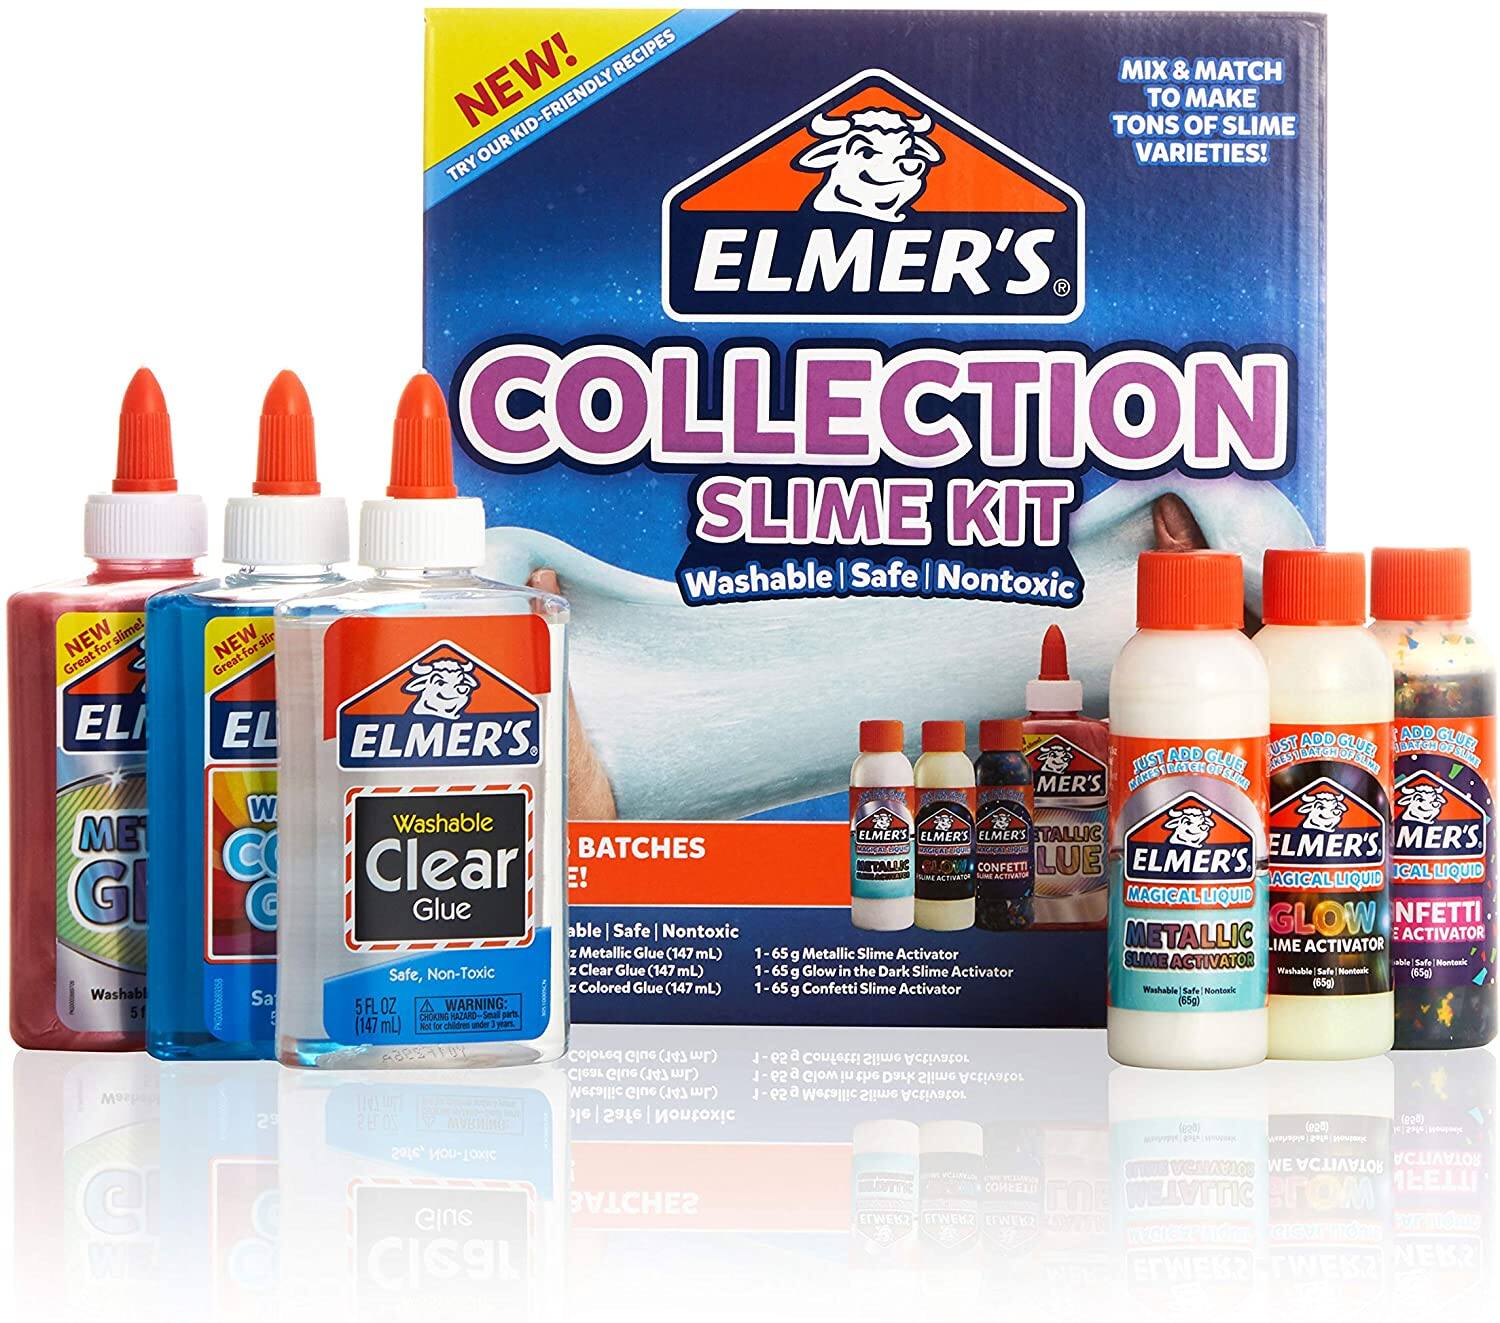 6-Piece Elmer's Collection Slime Kit Supplies (Glow In The Dark Slime Activator, Metallic Magical Liquid, Confetti Magical Liquid, More) $7.48 + free shipping w/ Prime or on $25+